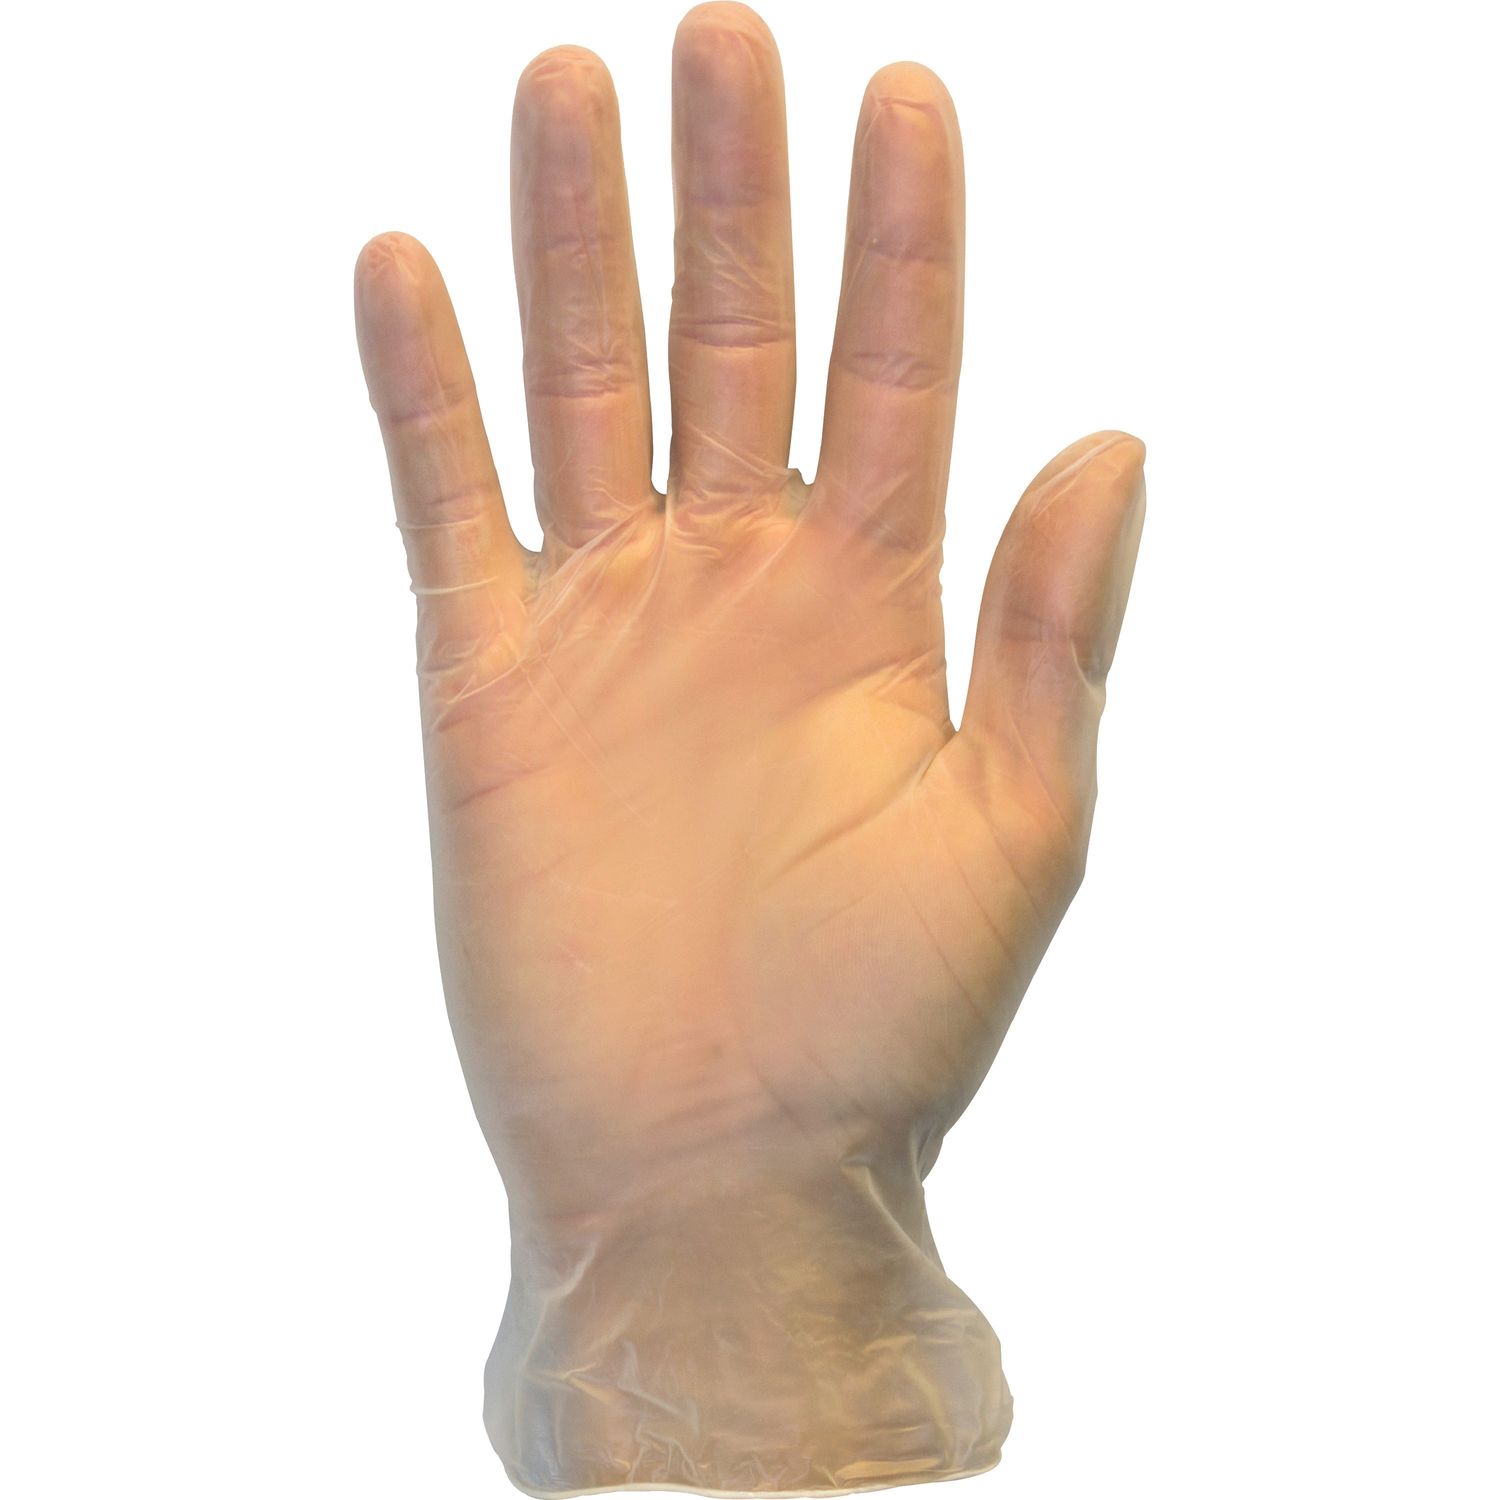 Powder Free Clear Vinyl Gloves Hand Protection, Large Size, Vinyl, Clear, Comfortable, Latex-free, DEHP-free, DINP-free, Chlorinate, Powder-free, For Food, Food Preparation, Cleaning, 1000 / Carton